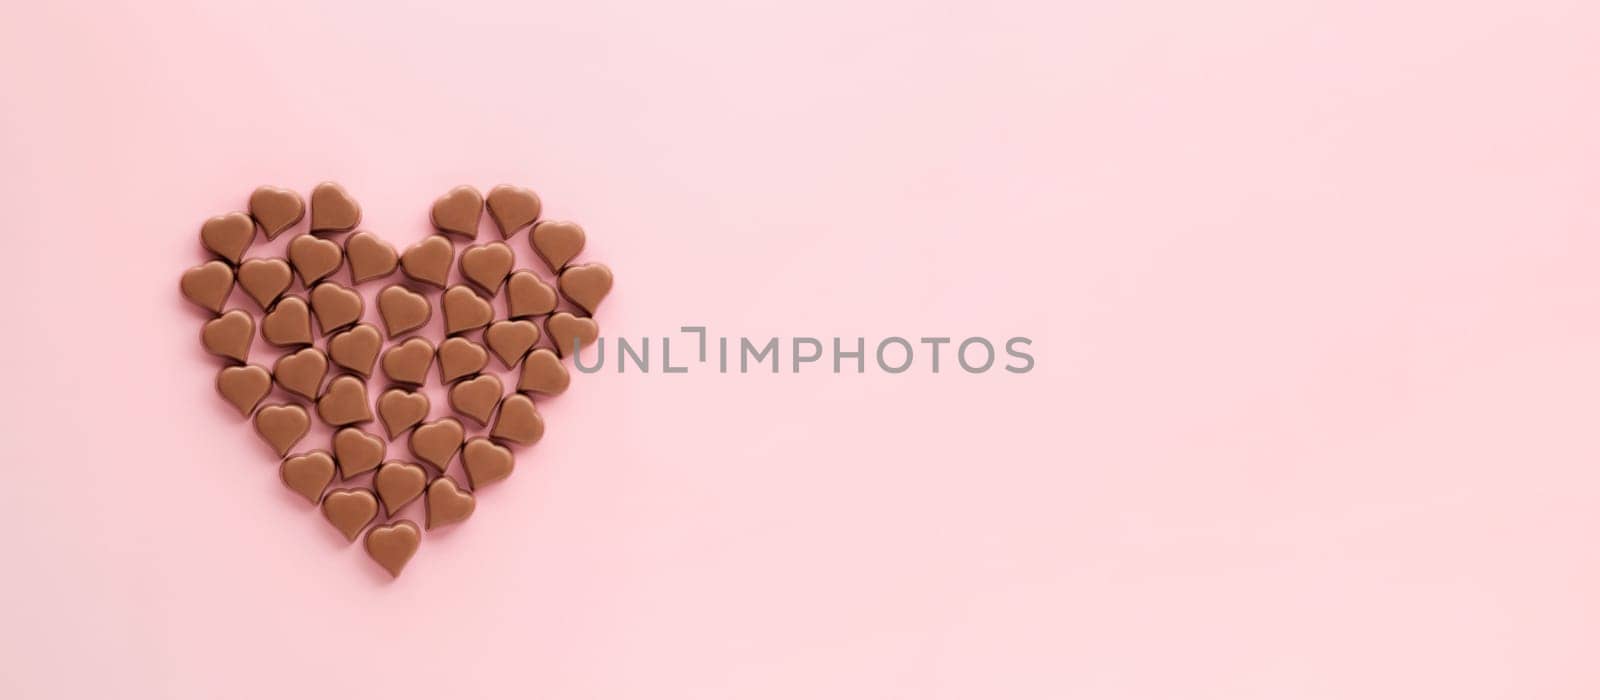 Heart made of romantic chocolate confections in heart shapes on pink background. Long horizontal banner with chocolate heart of milk chocolate sweet, copyspace. Topview flatlay. Valentines Day concept